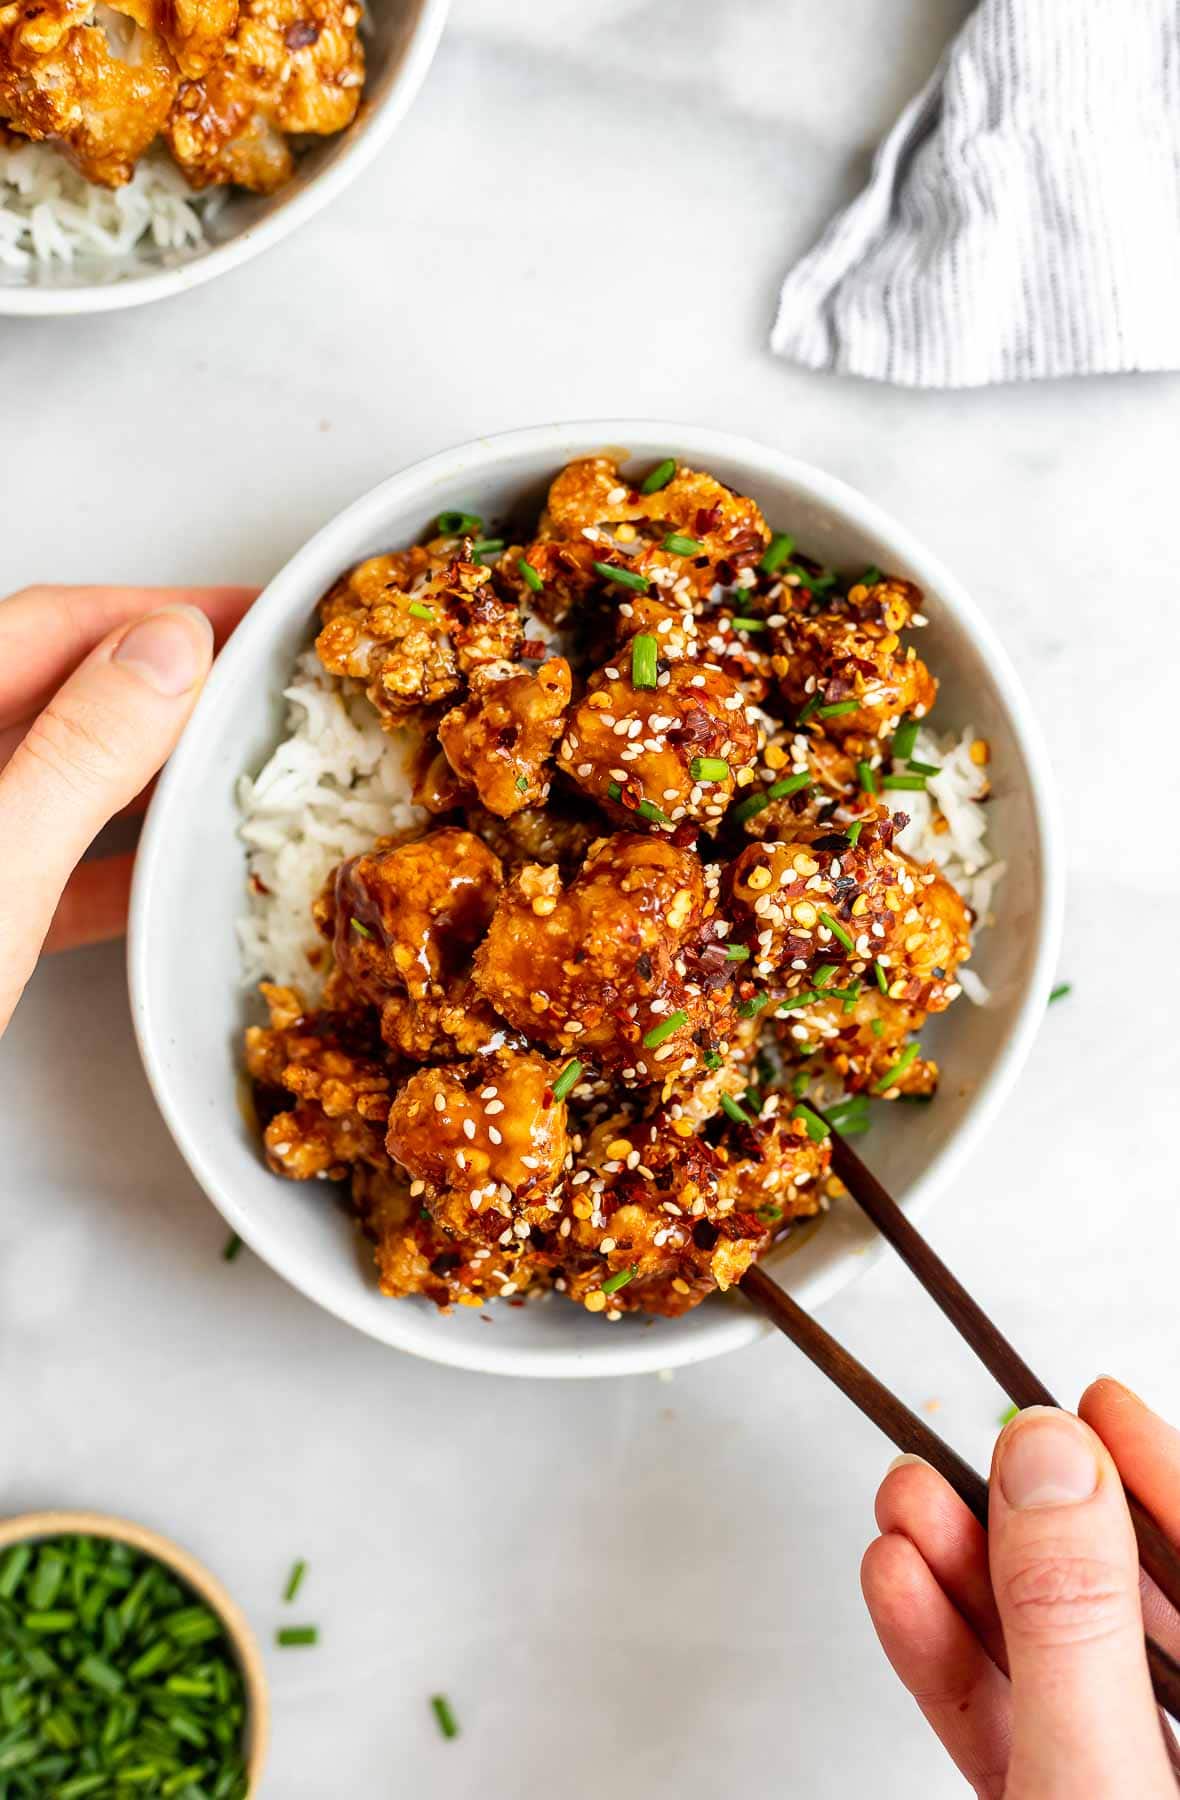 Vegan baked Sesame cauliflower in a bowl with rice underneath.